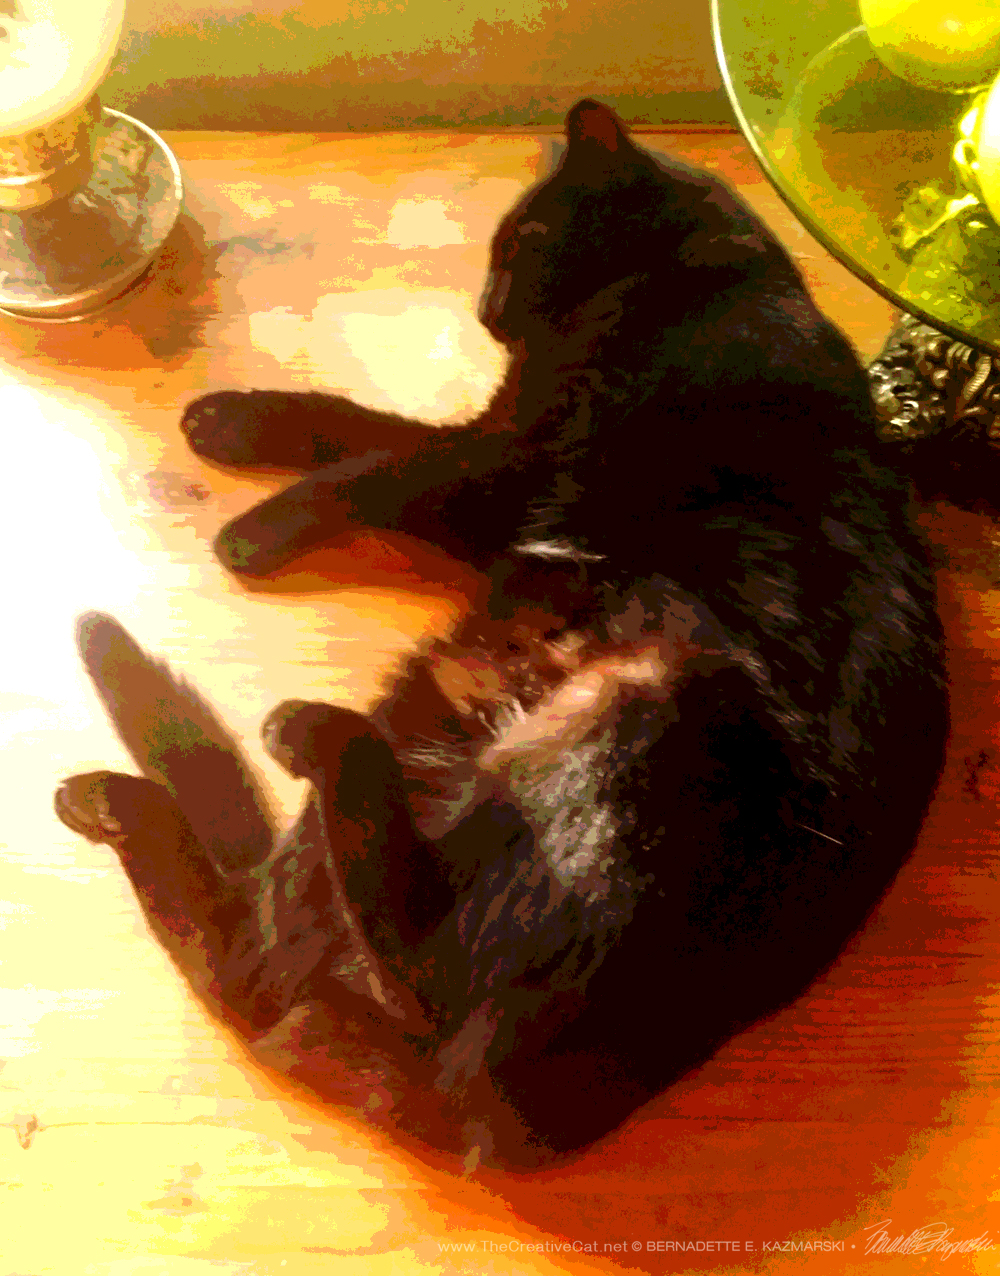 Bella sunning her belly, posterized.